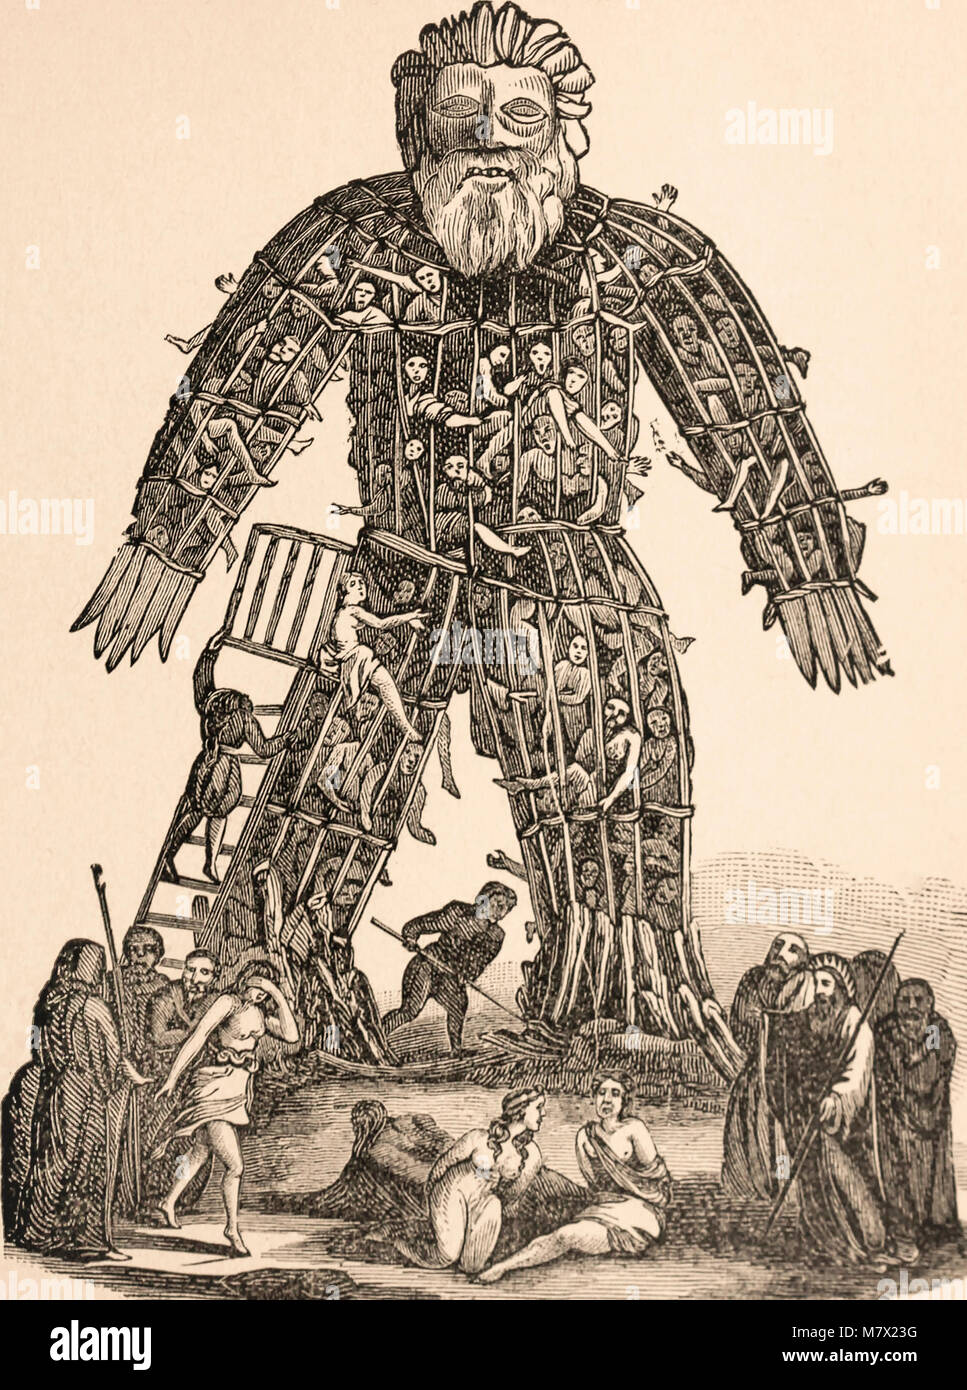 Wicker man.  Large wooden or cane hollow wickerwork statue used by Druid priests.  Reportedly, victims were placed in the structure and then burned to death as a form of sacrifice to the gods. From an early 19th century print. Stock Photo